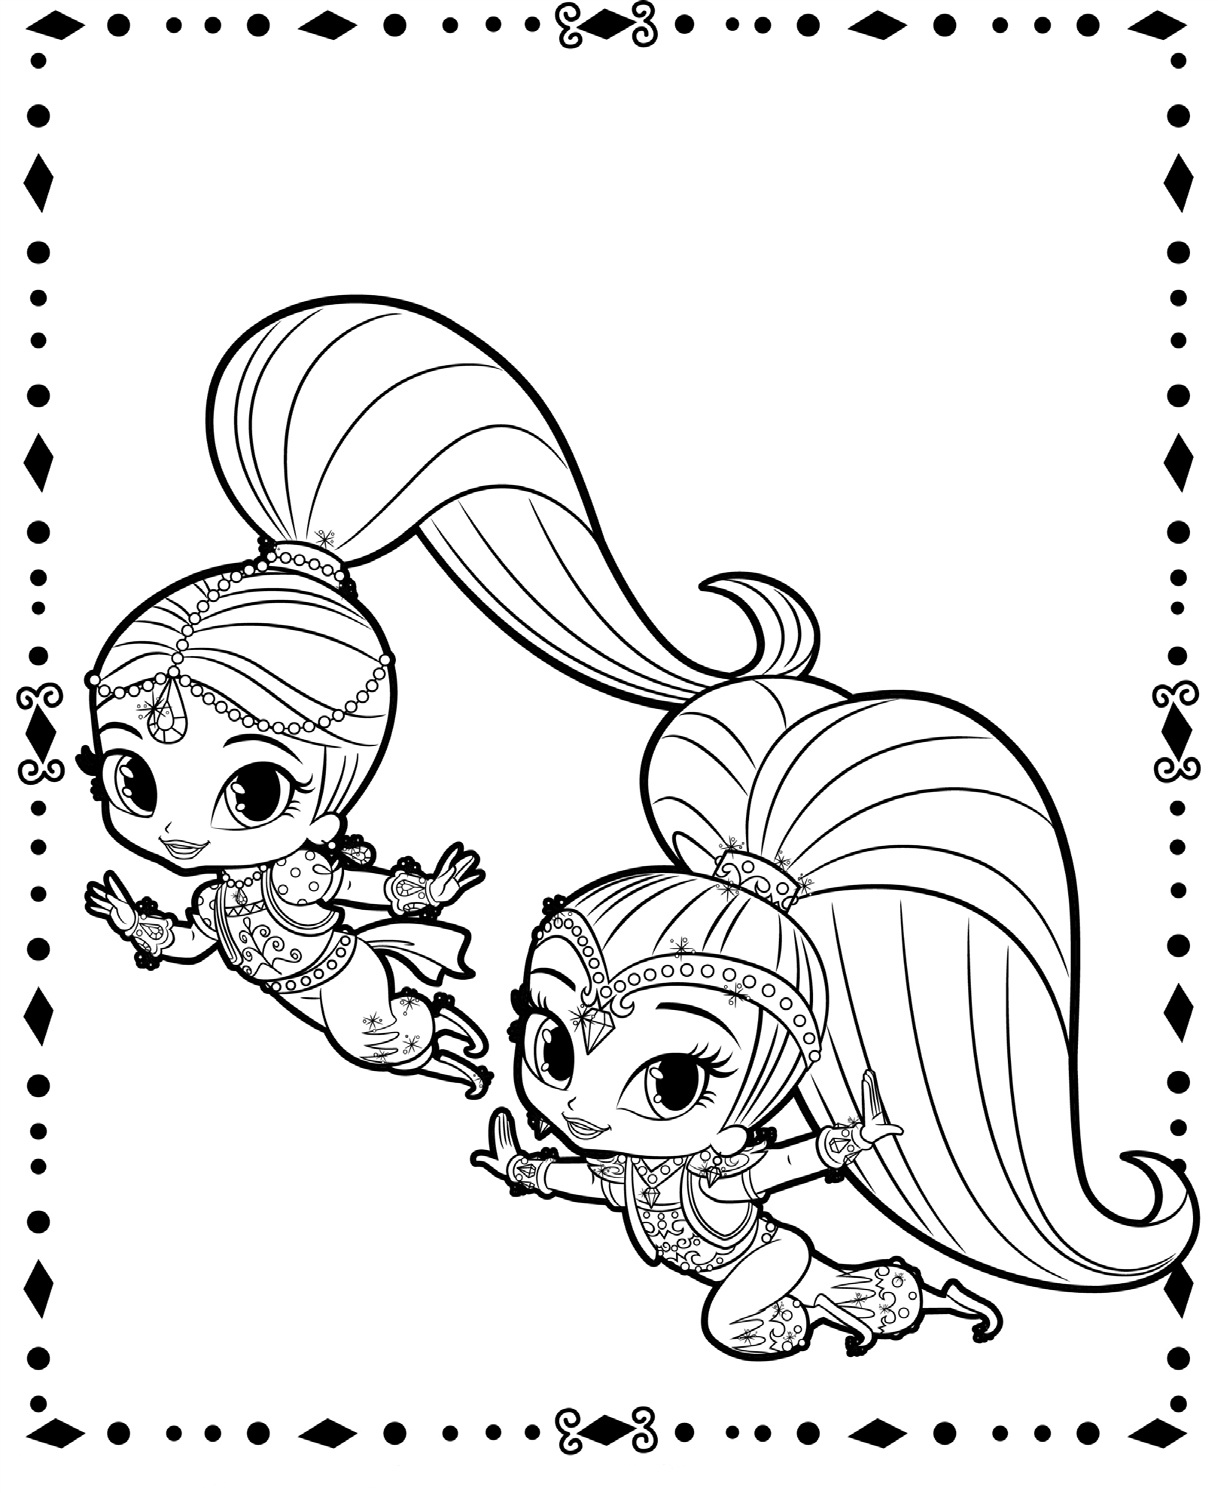 shimmer and shine to color shimmer and shine colouring sheets and color to shine shimmer 